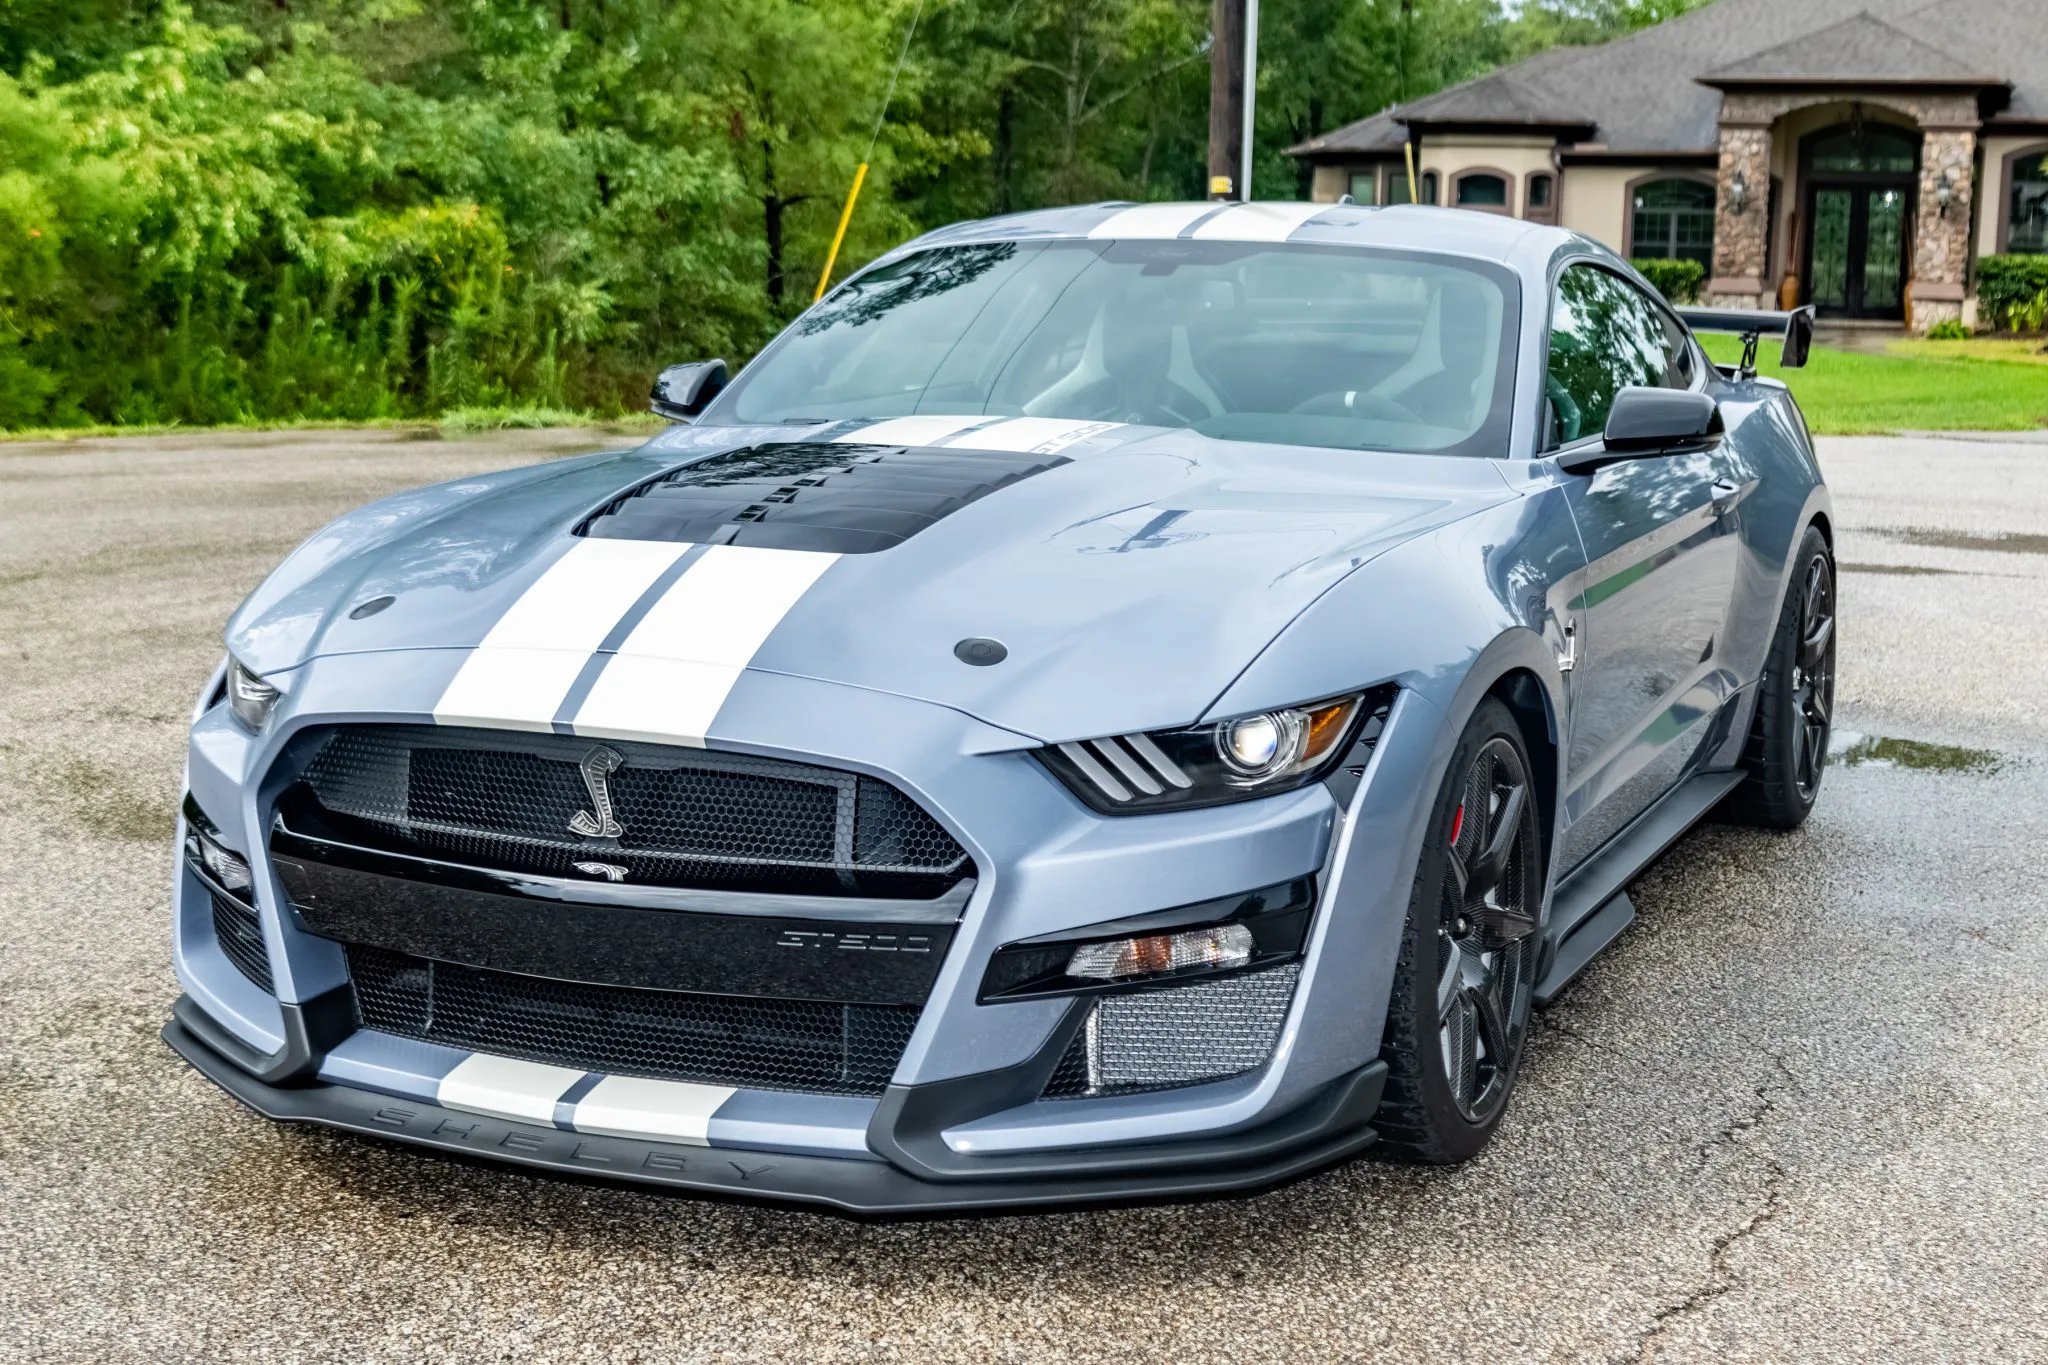 Limited Edition 2022 Ford Mustang Shelby GT500 Now Available On Bring A Trailer!